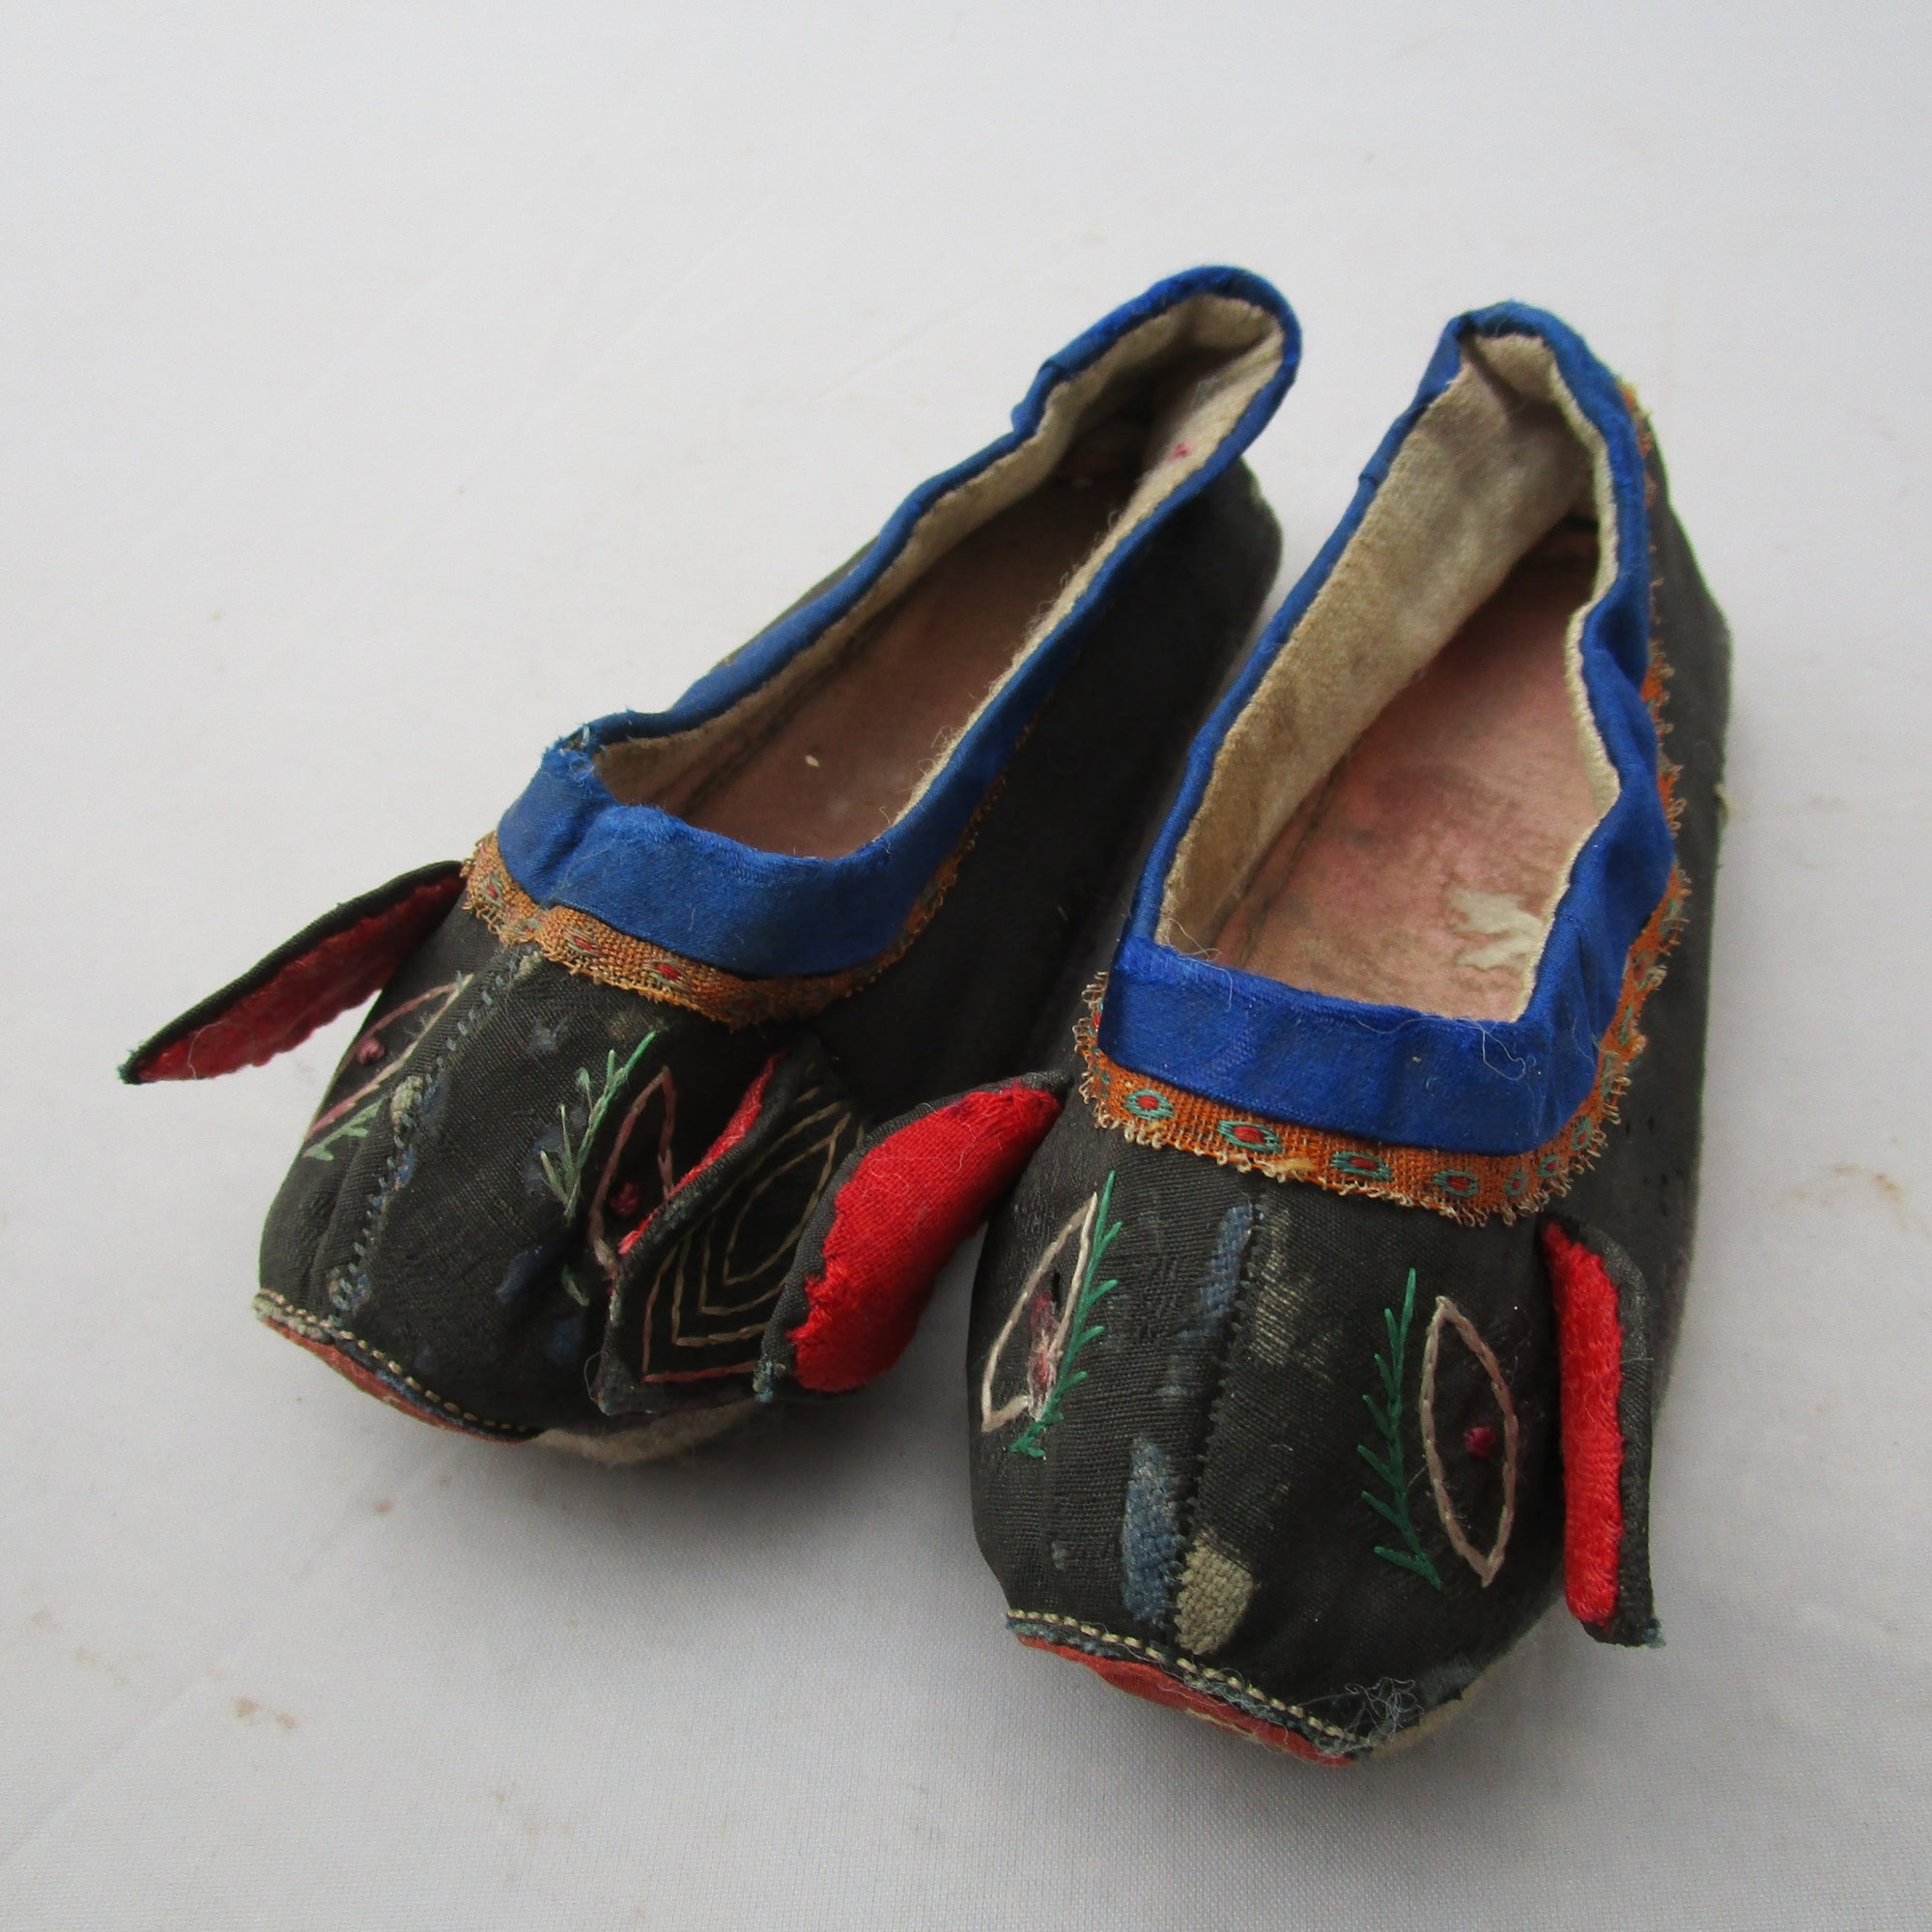 Pair Of Silk Chinese Year Of The Pig Childs Shoes Vintage c1971